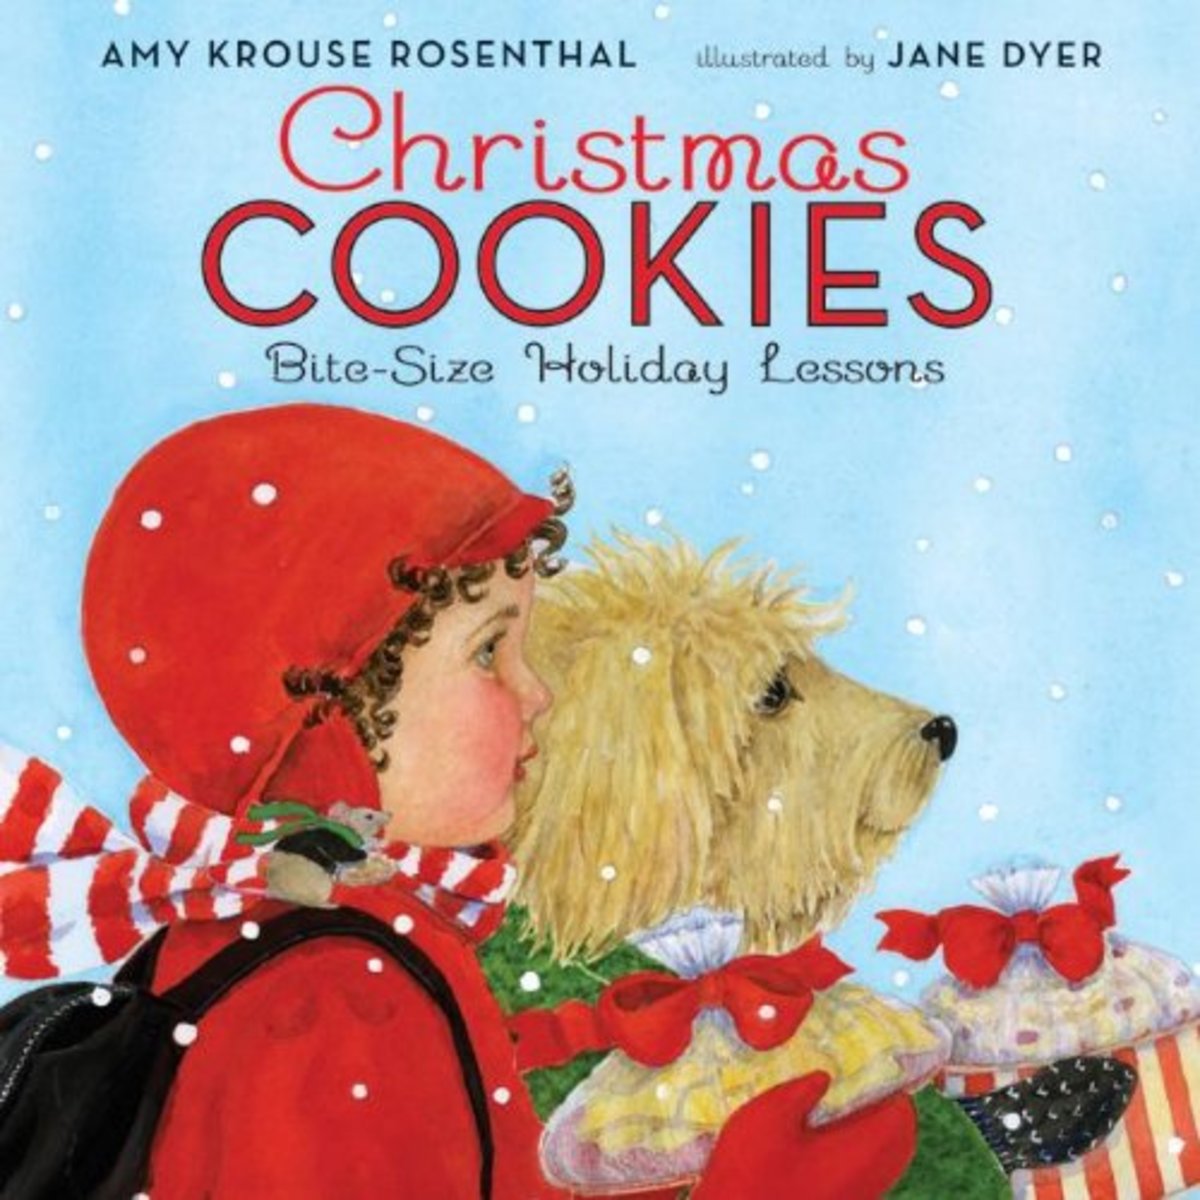 Christmas Cookies: Bite-Size Holiday Lessons Children's Book Review